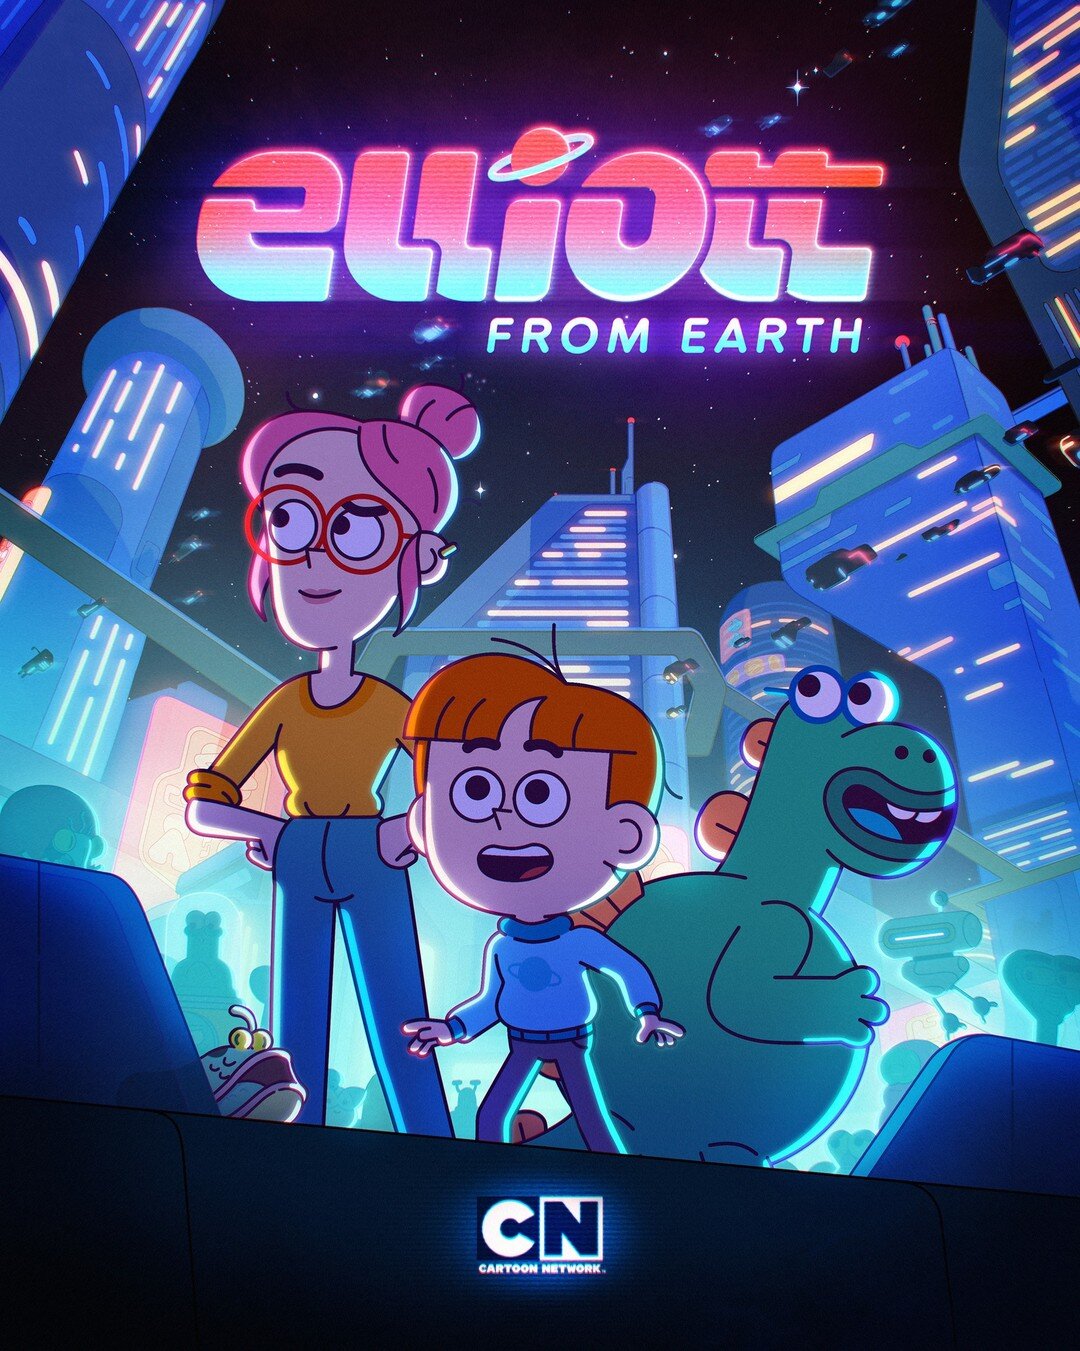 Here is the third poster I made for the premier of Elliott From Earth out on @cartoonnetworkuk tomorrow at 10am.

This was my first dip into the world of television. Although it was extremely daunting to jump in midway through the production, the opp